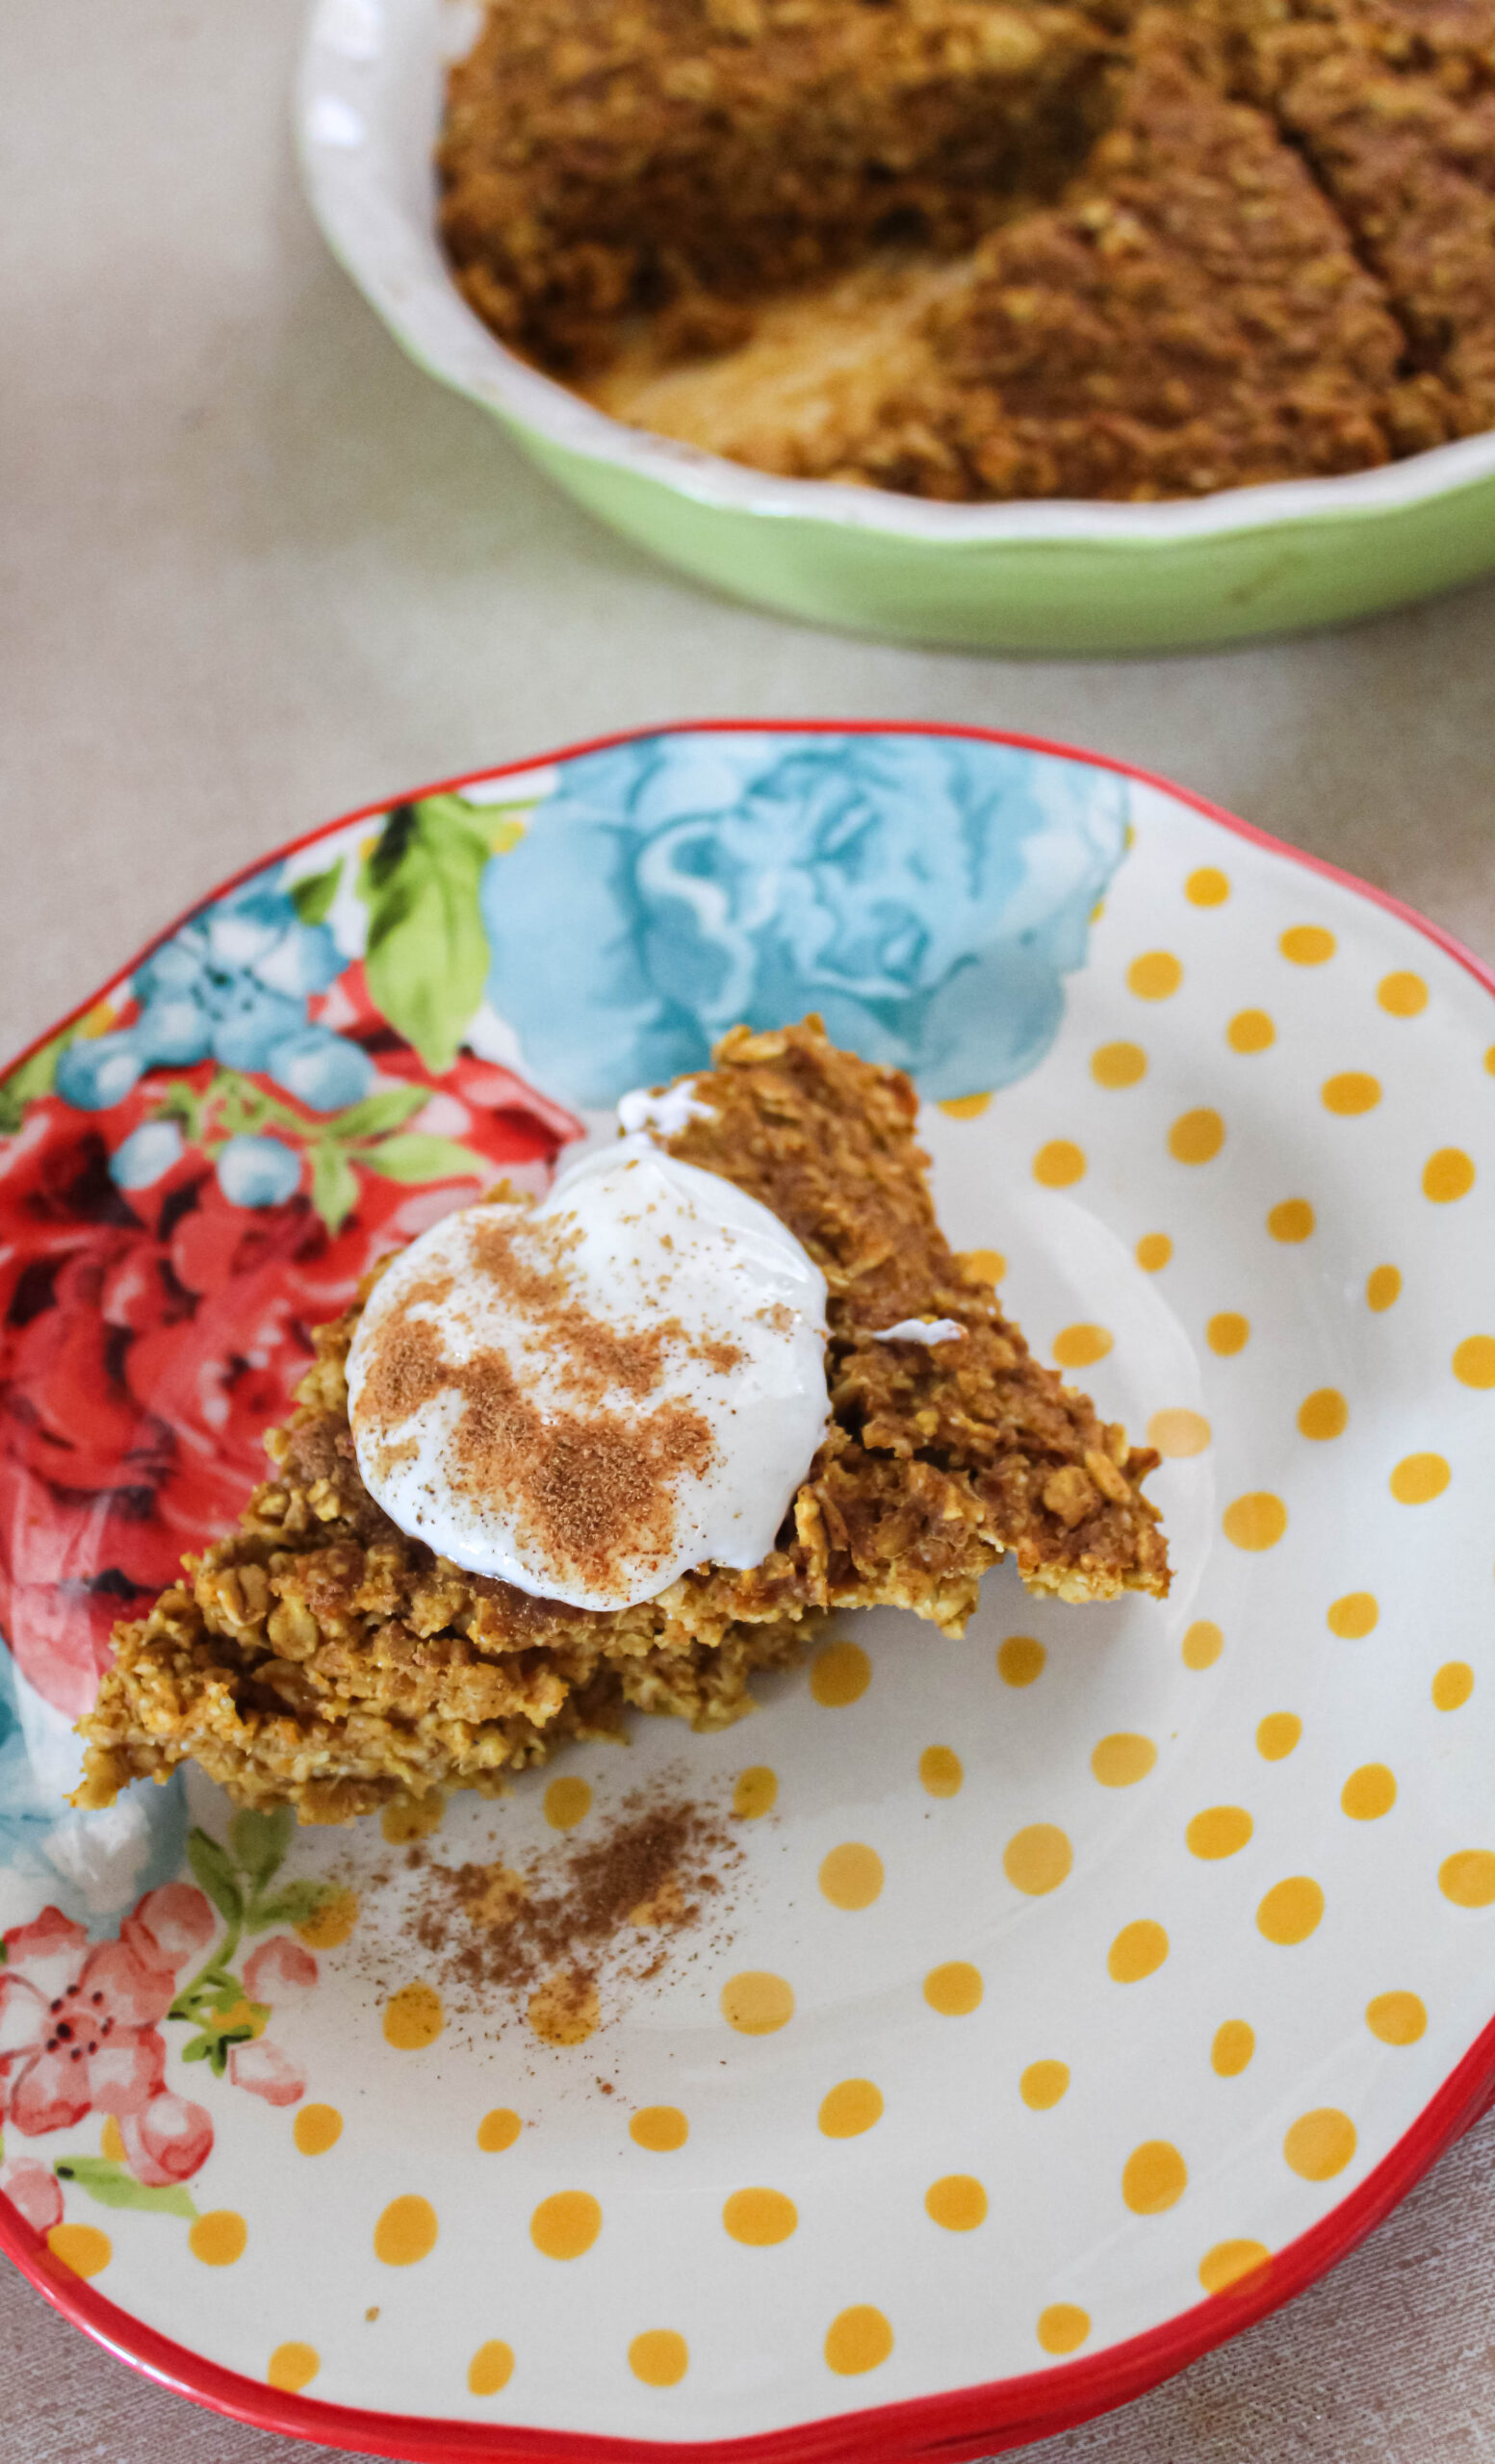 Need an easy Fall-inspired breakfast? Try my Pumpkin Roll Baked Oatmeal! Cakey Pumpkin Spice flavored oatmeal is topped by a creamy icing. What could be better? This is a Trim Healthy Mama E. 